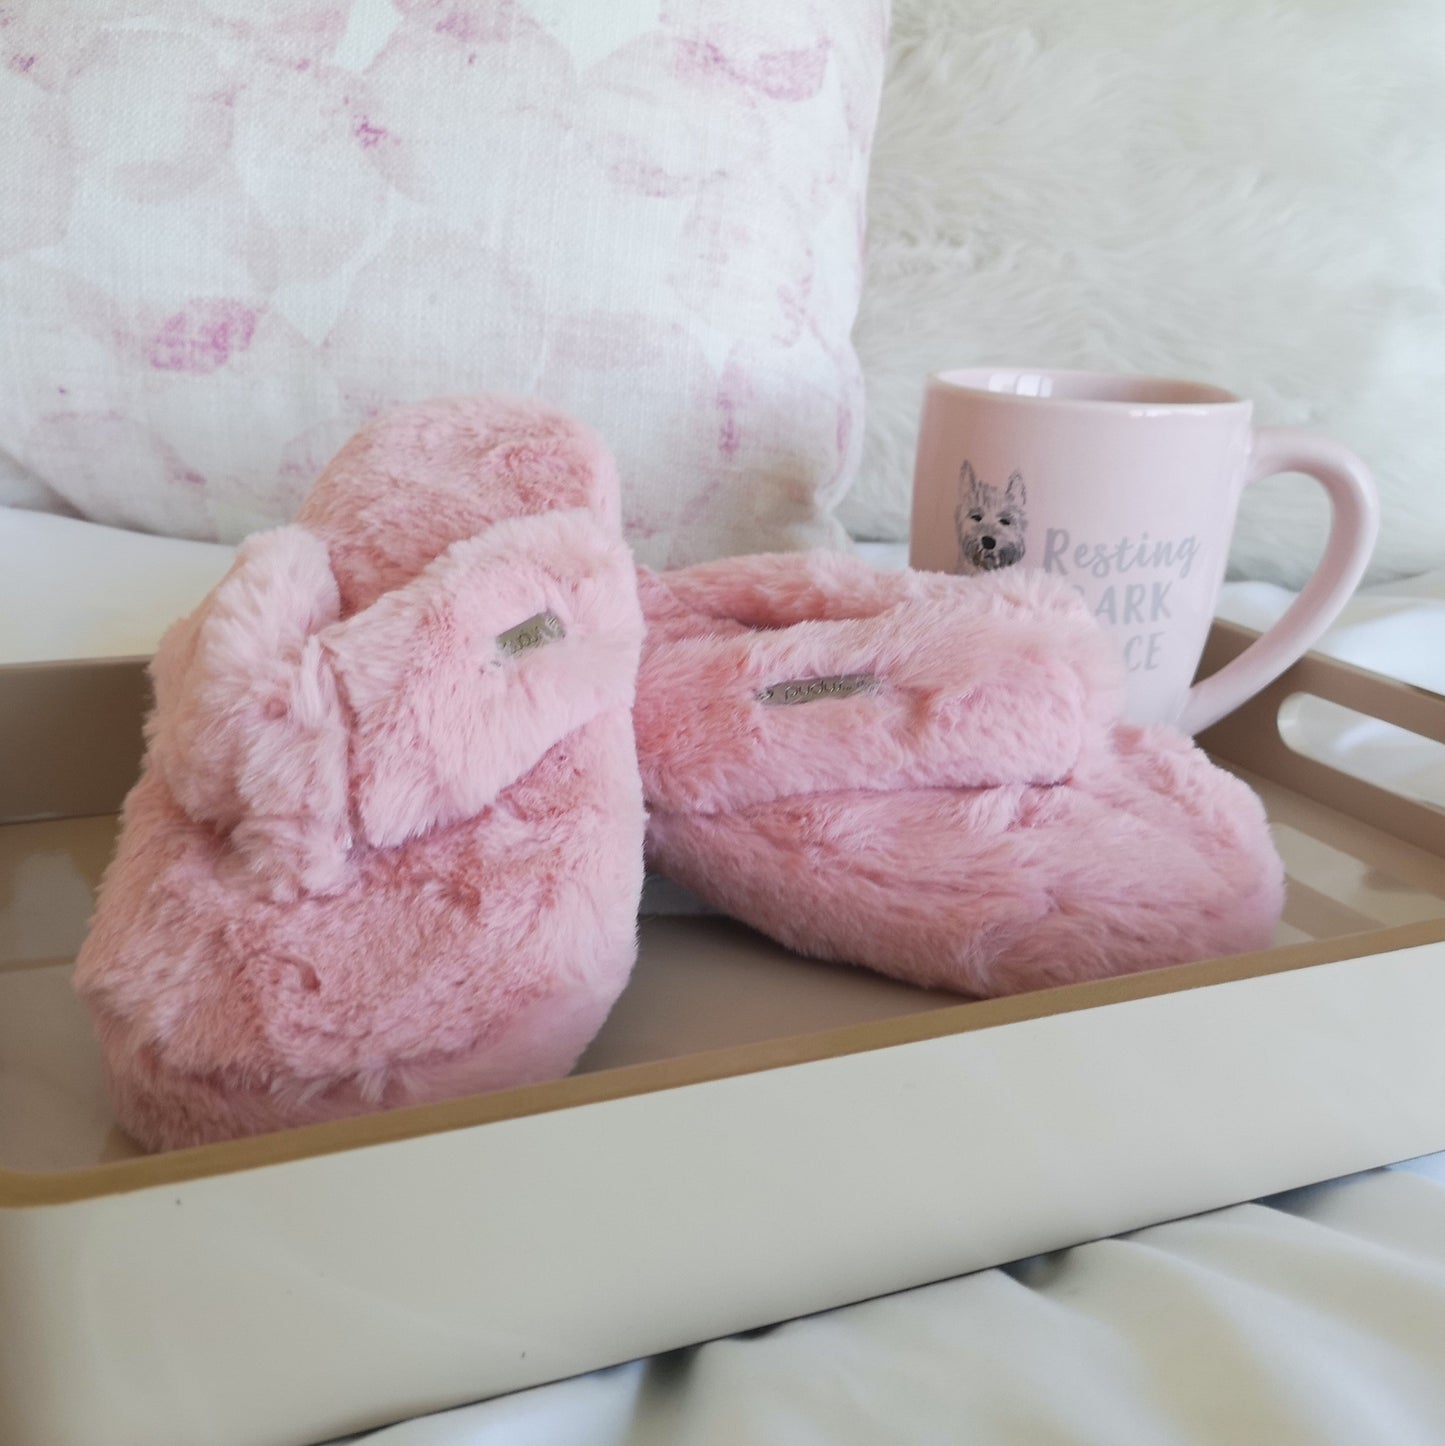 Blush Pink Cottontail Flip Flop Slippers - Memory Foam Slippers for Women with Soft  Faux Fur Lining 